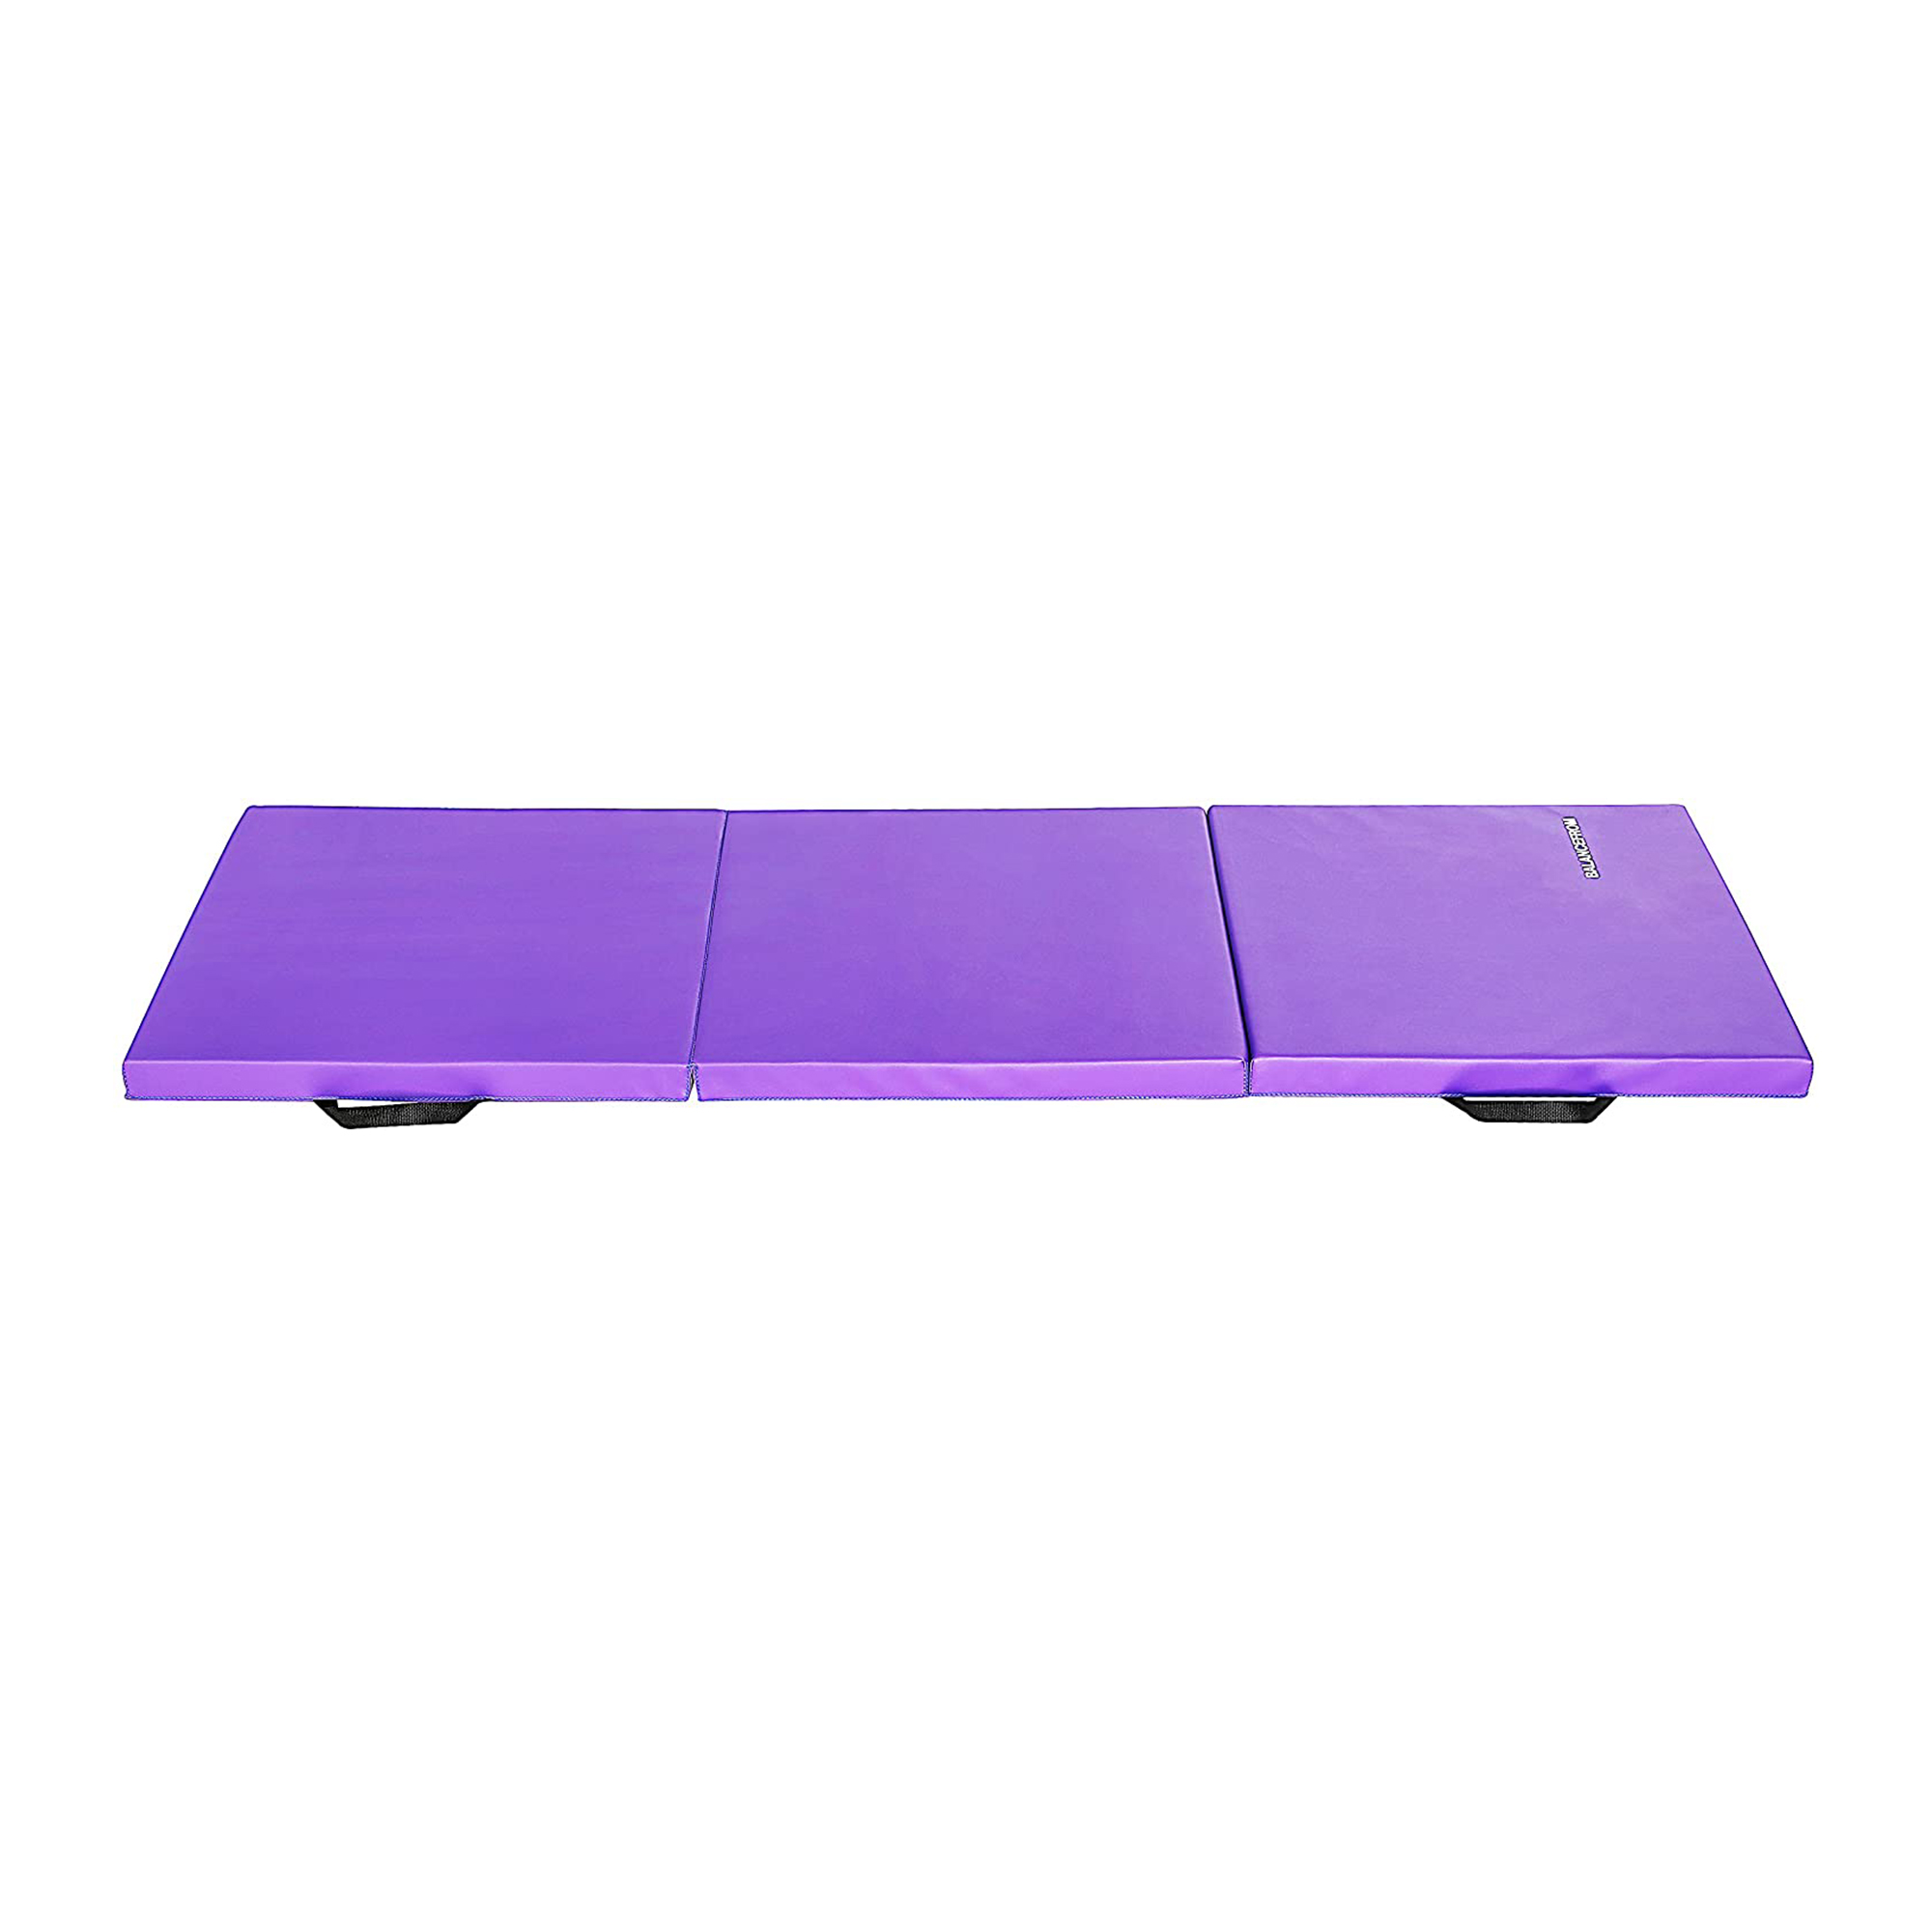 BalanceFrom 6 Ft. x 2 Ft. x 2 In. Three Fold Folding Exercise Mat with Carrying Handles for MMA, Gymnastics and Home Gym, Purple - image 5 of 6